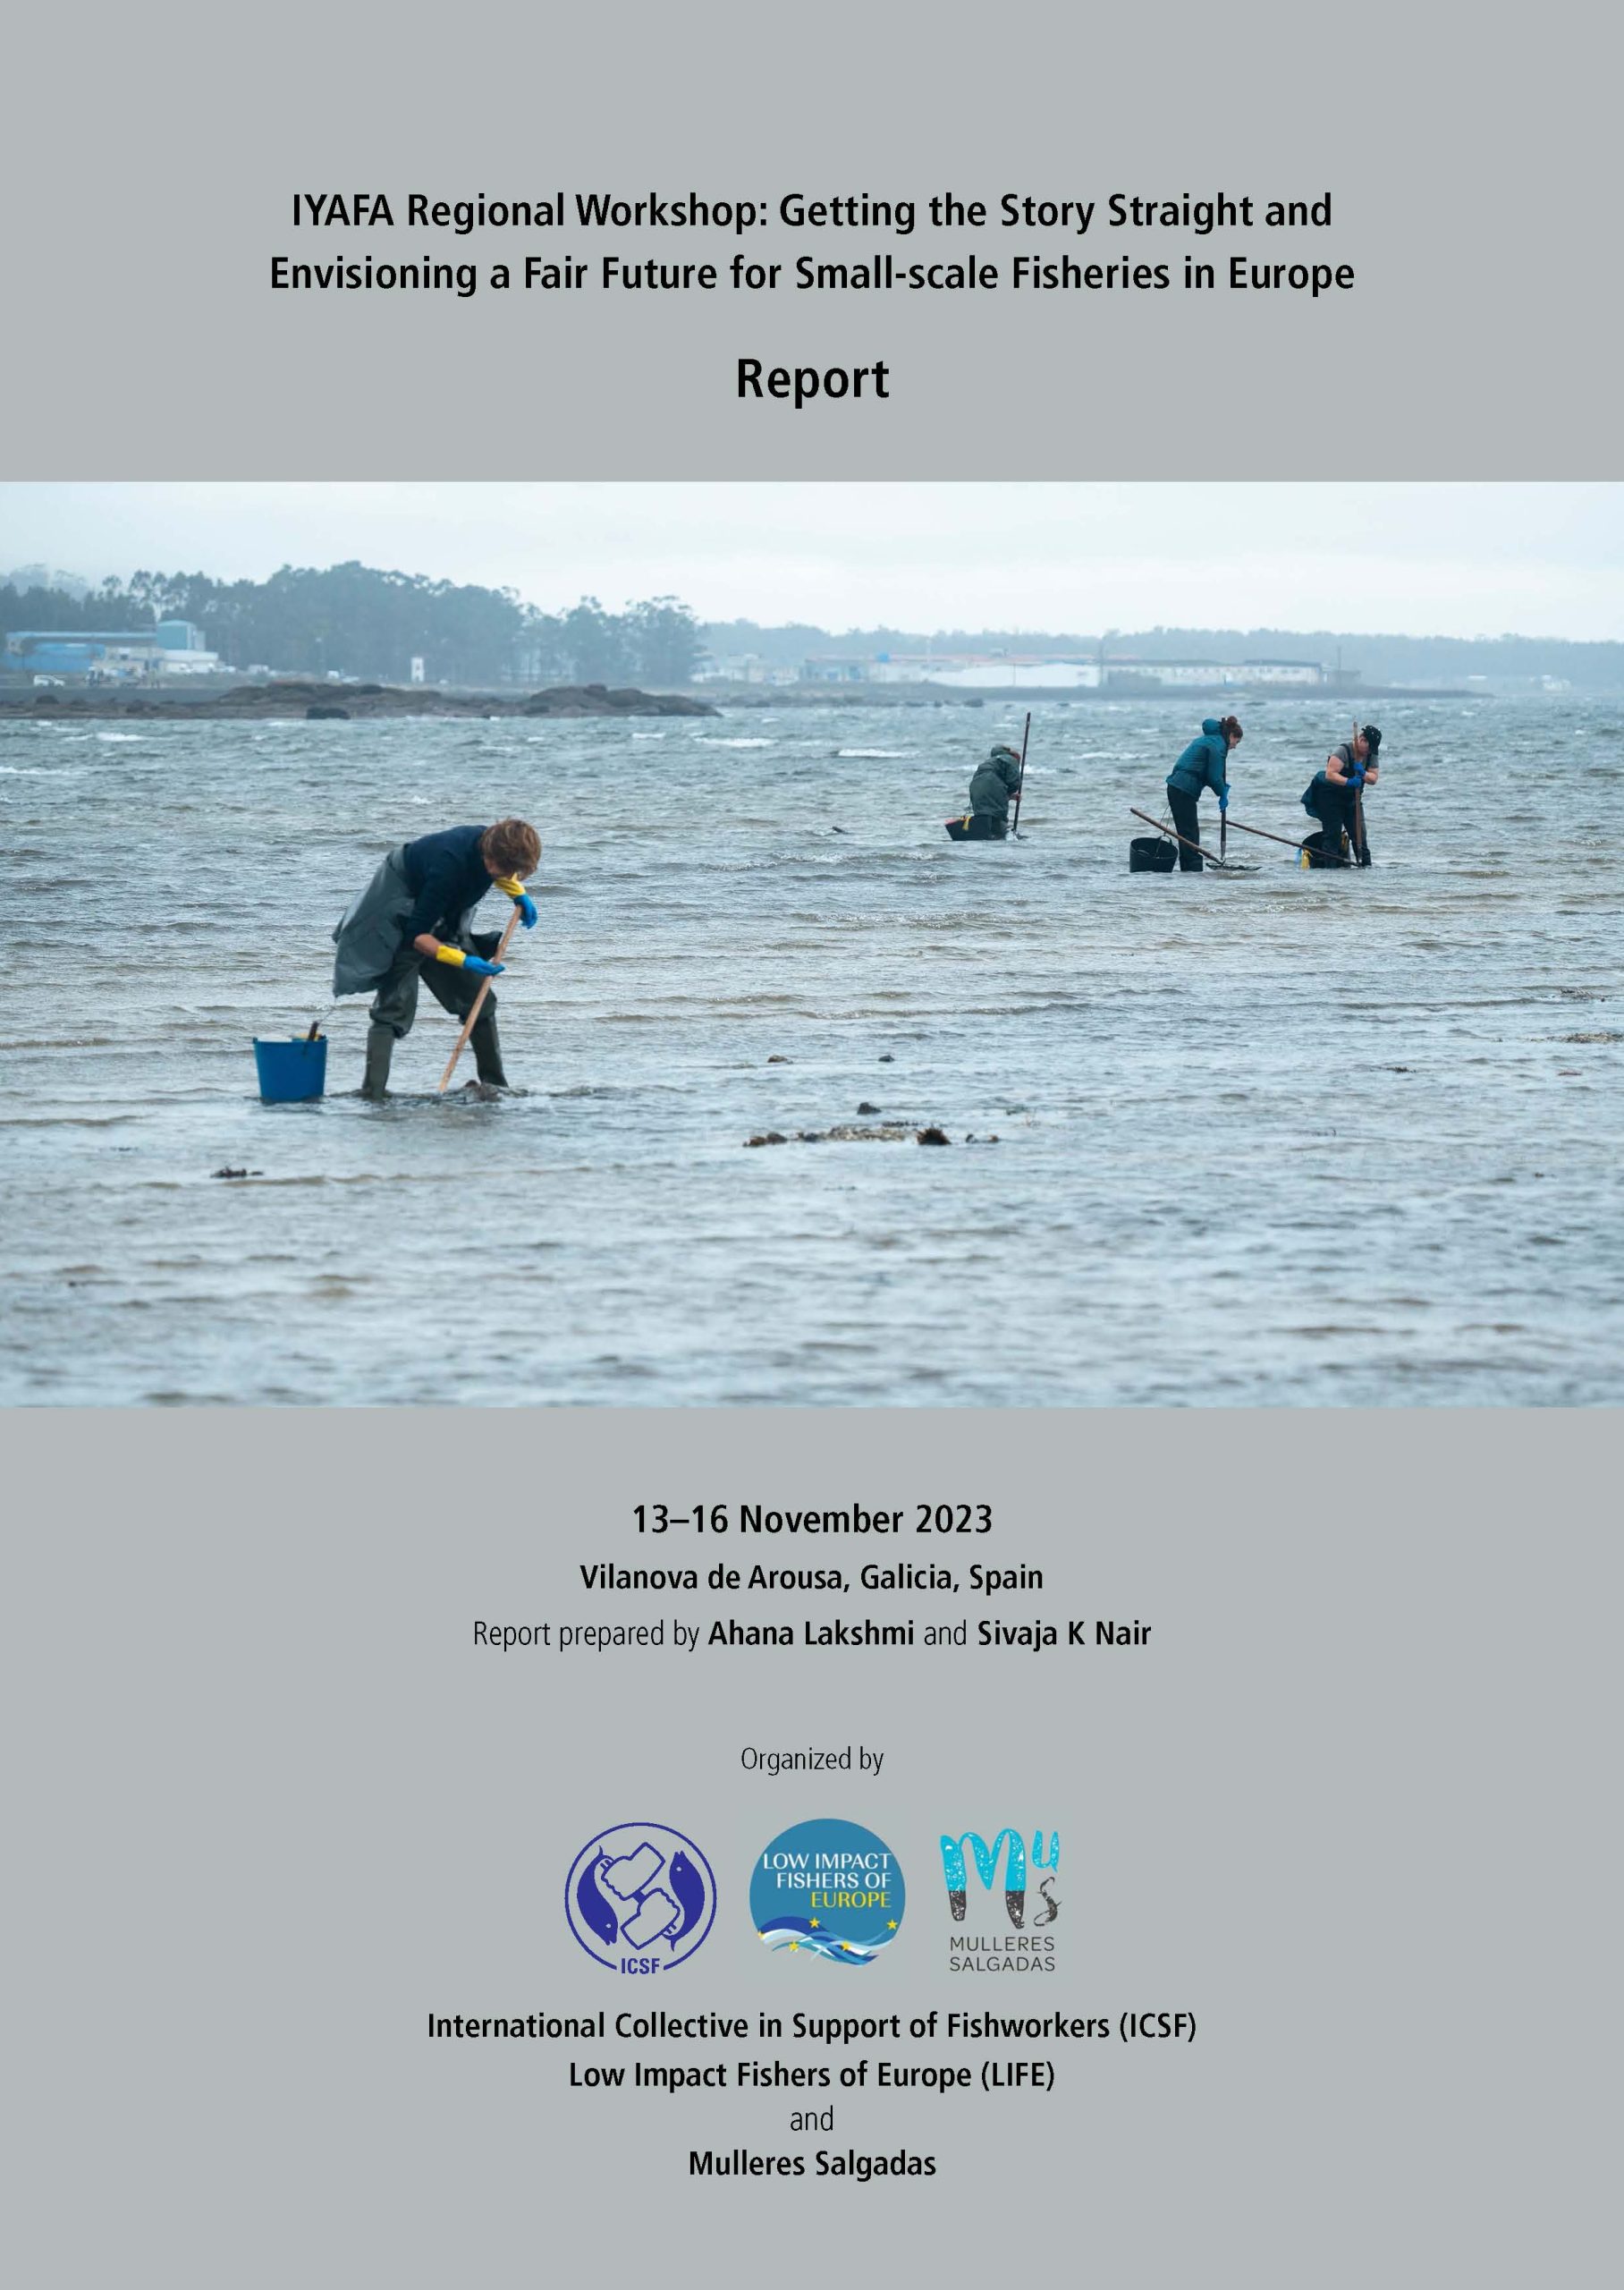 Report of the IYAFA Regional Workshop: Getting the Story Straight and Envisioning a Fair Future for Small-scale Fisheries in Europe, 13-16 November 2023, Galicia, Spain Report prepared by Ahana Lakshmi and Sivaja K Nair